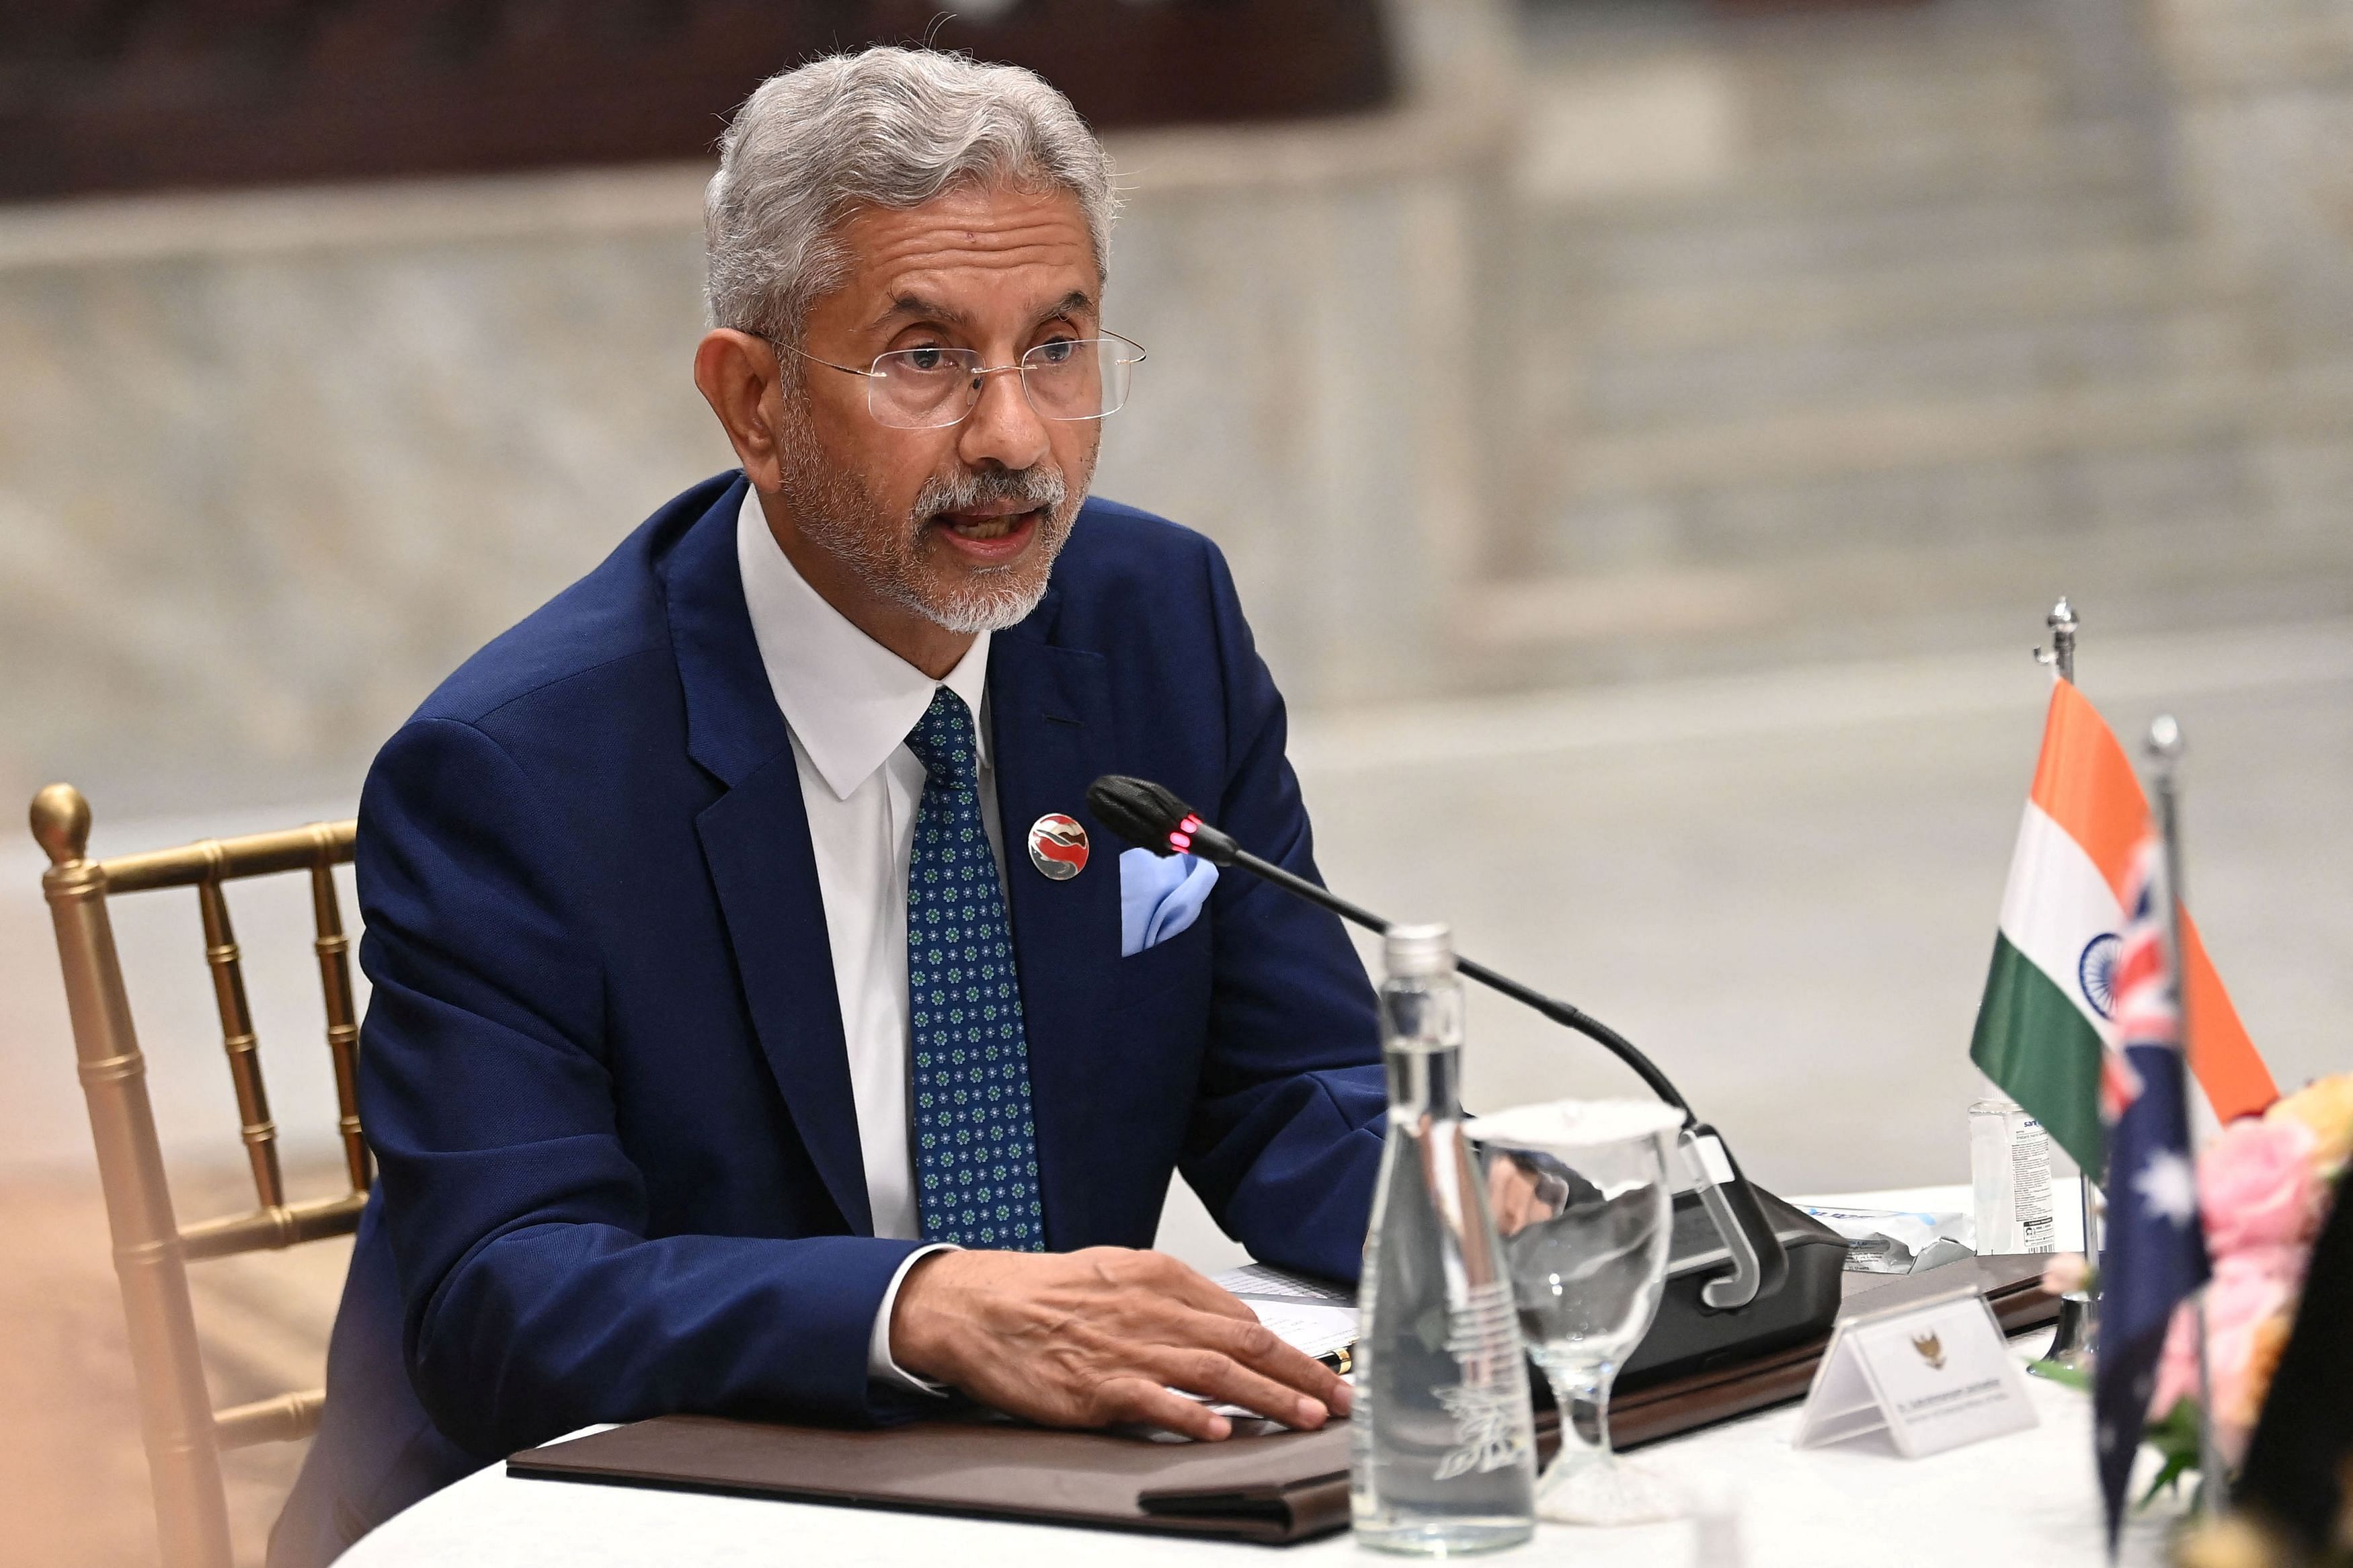 India's Foreign Minister Subrahmanyam Jaishankar attends a meeting in Jakarta, Indonesia, July 12, 2023. Antara Foto/Aditya Pradana Putra via REUTERS ATTENTION EDITORS - THIS IMAGE HAS BEEN SUPPLIED BY A THIRD PARTY. MANDATORY CREDIT. INDONESIA OUT. NO COMMERCIAL OR EDITORIAL SALES IN INDONESIA.